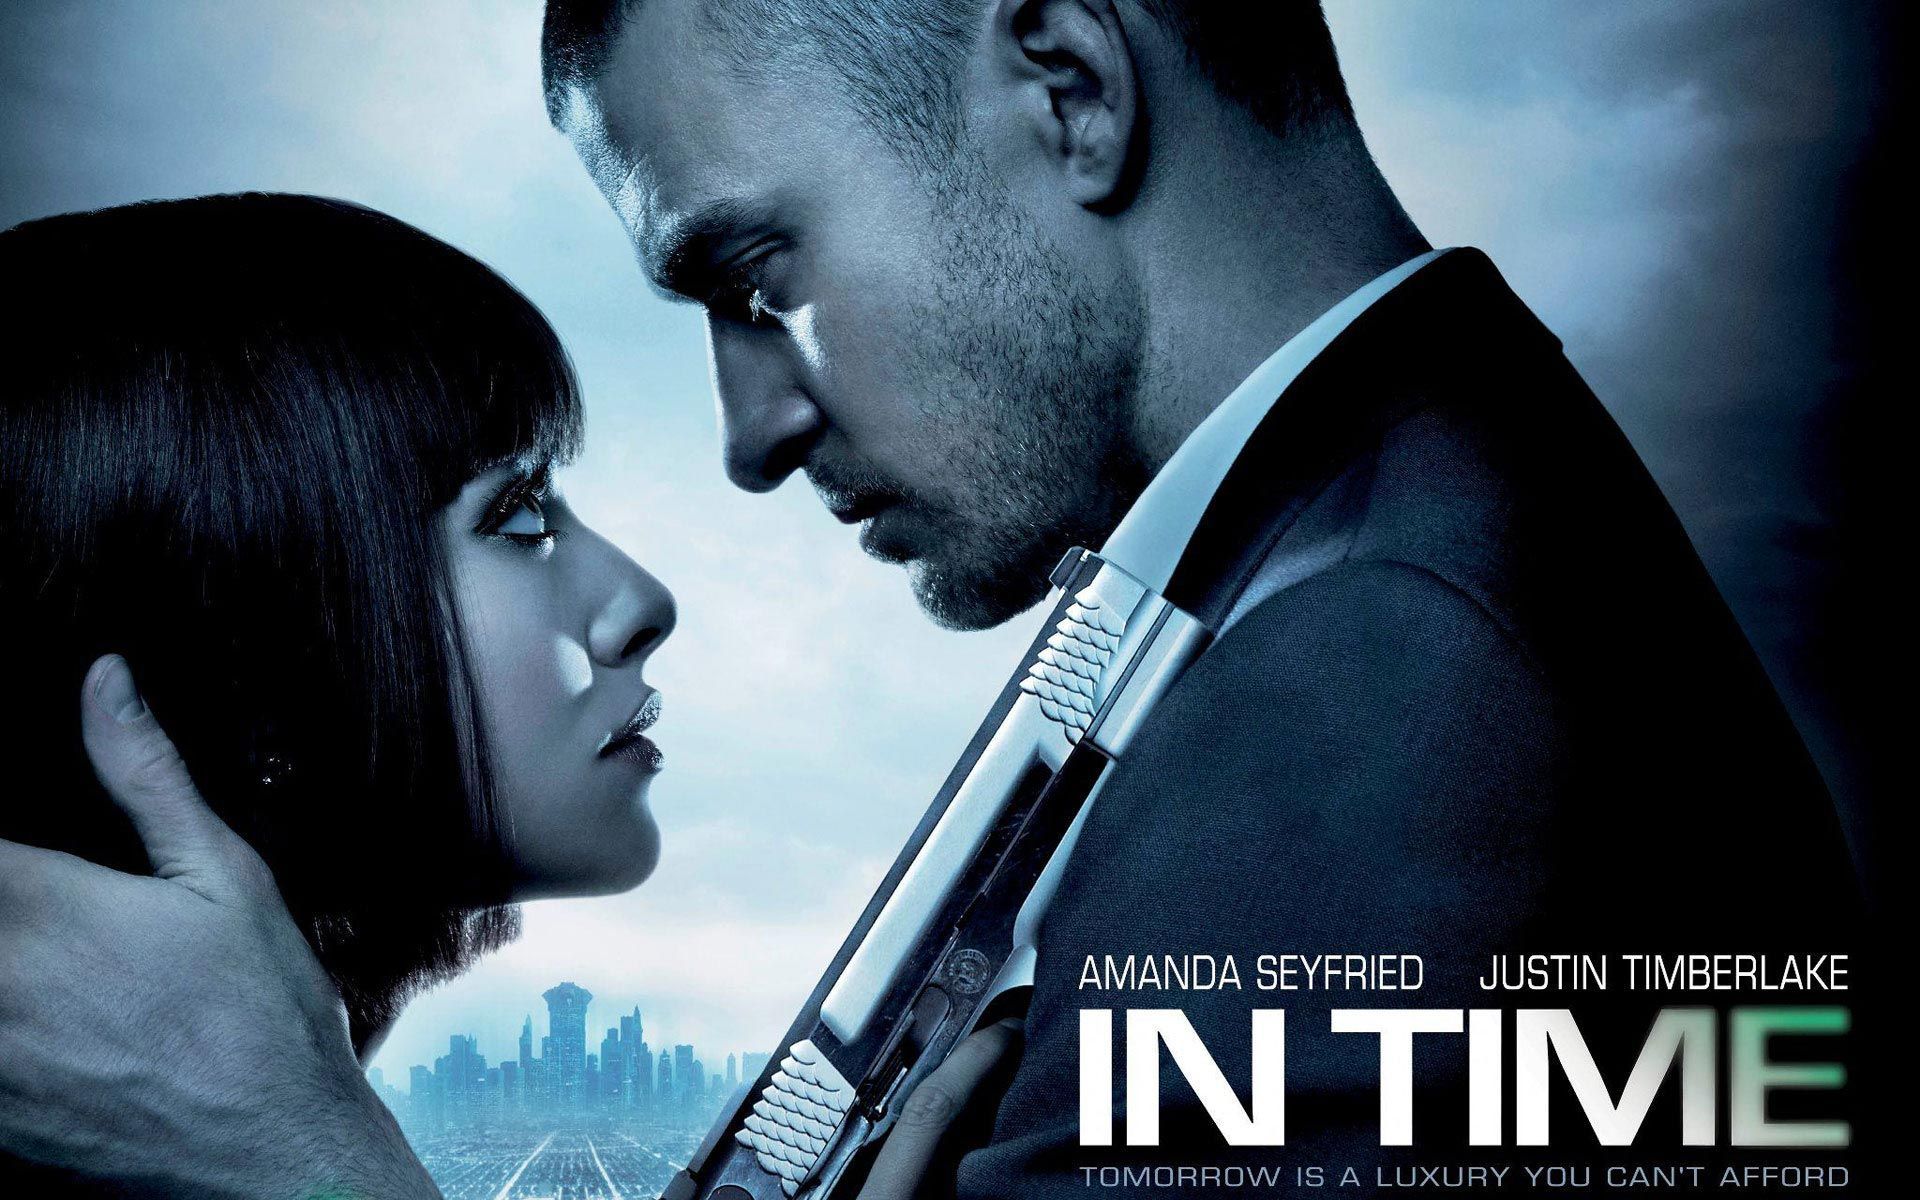 In Time (2011) Wallpaper: In Time movie wallpaper. Movie wallpaper, Free movies online, Adventure movies